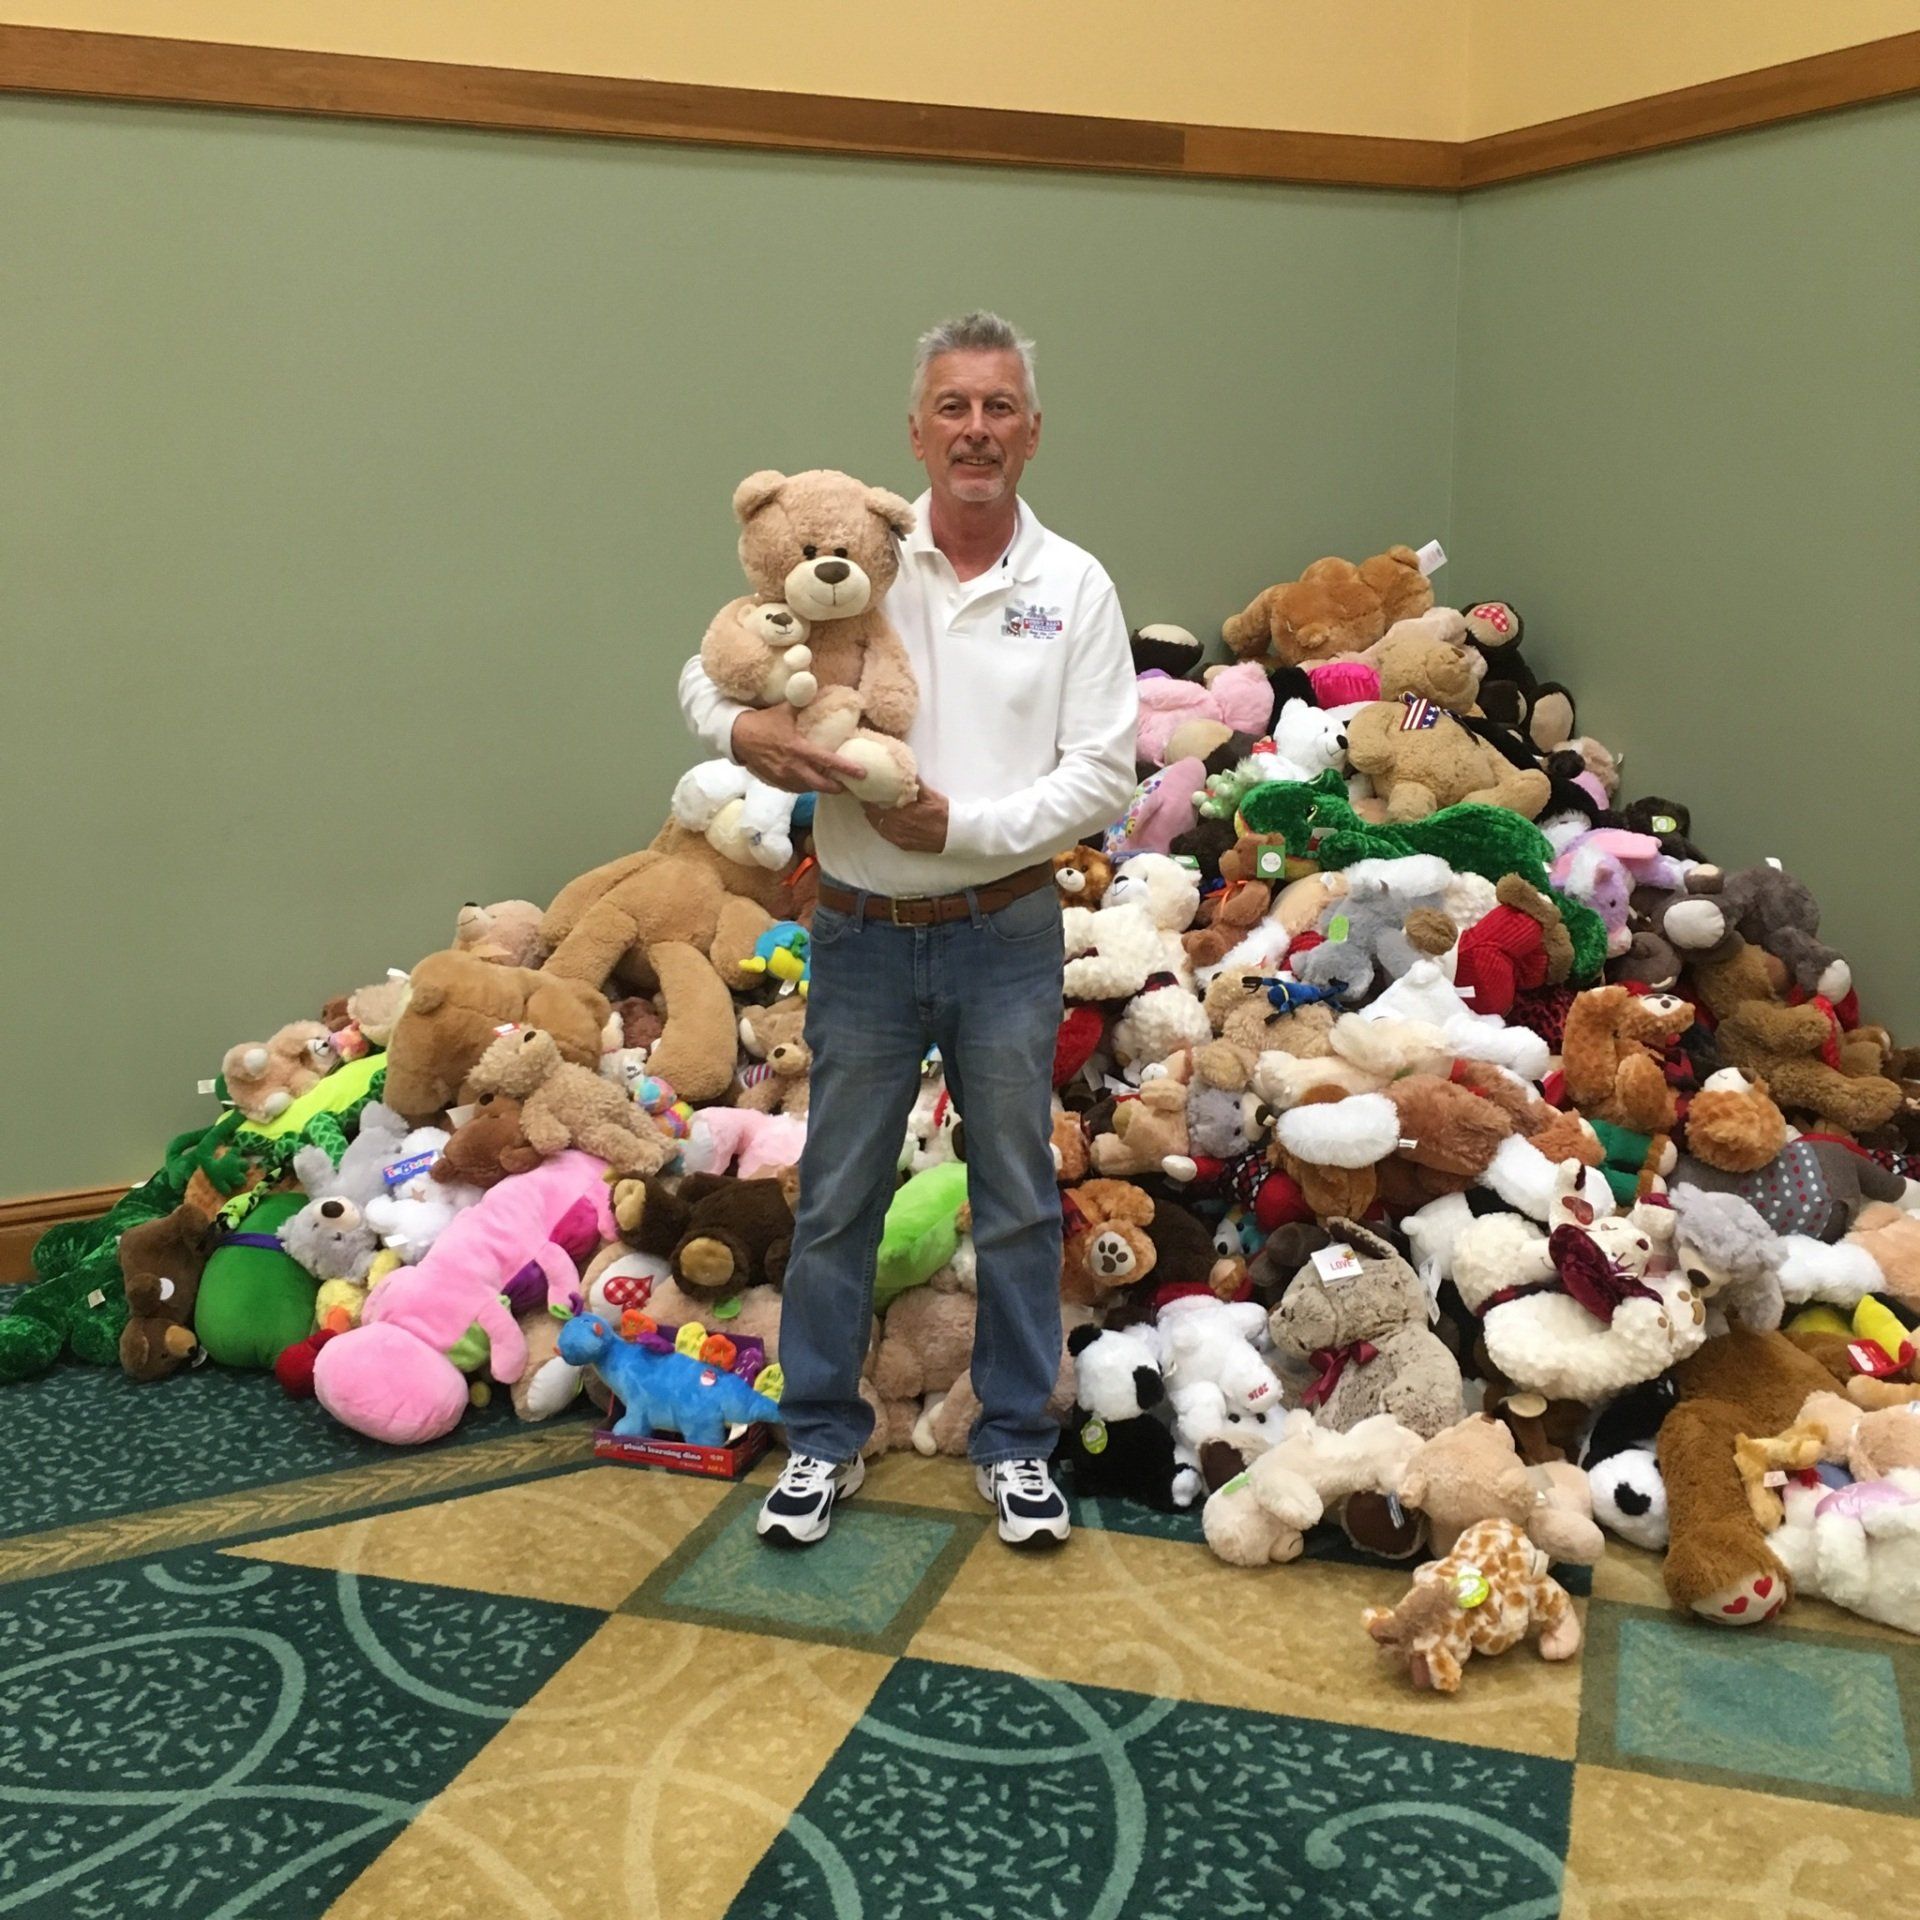 A 12 foot high wall behind the founder with over 2500 teddy bears